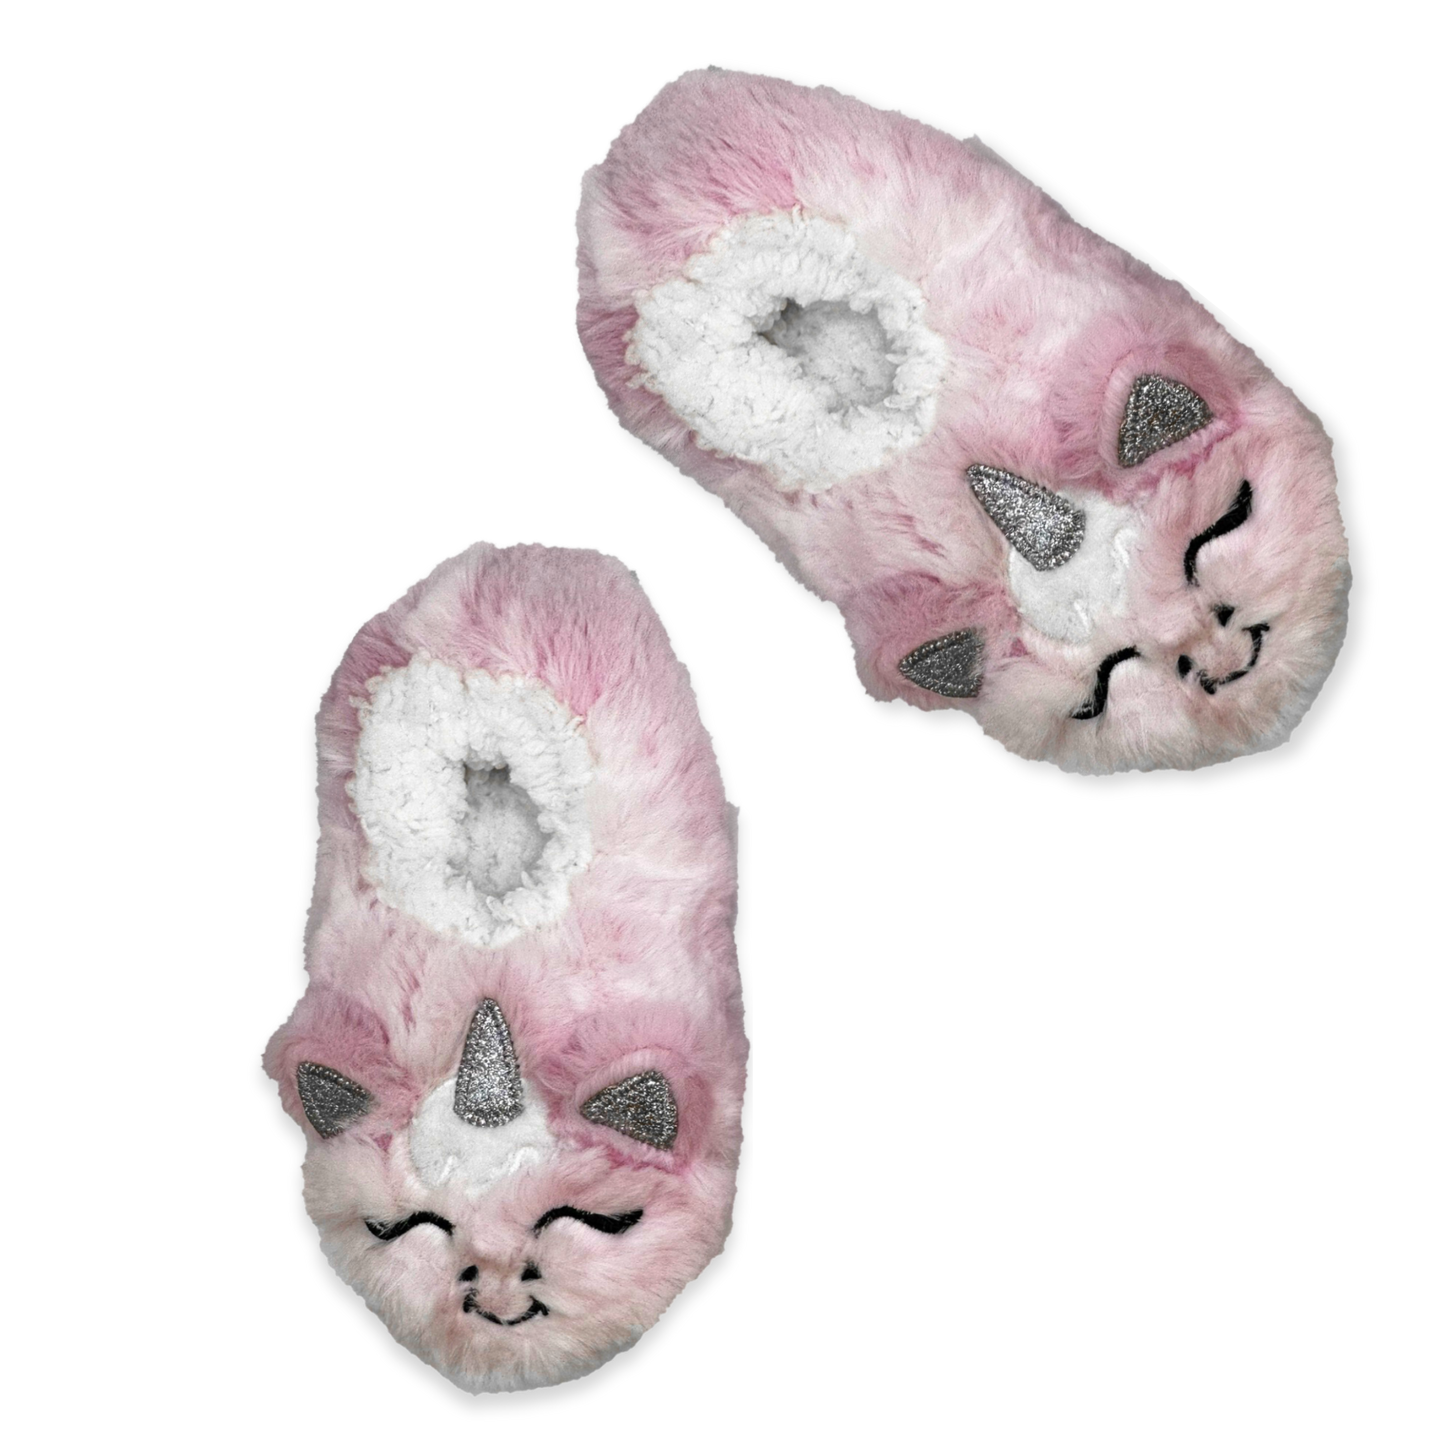 A pair of pink slippers with a smiling unicorn face on them and 3D sparkly ears